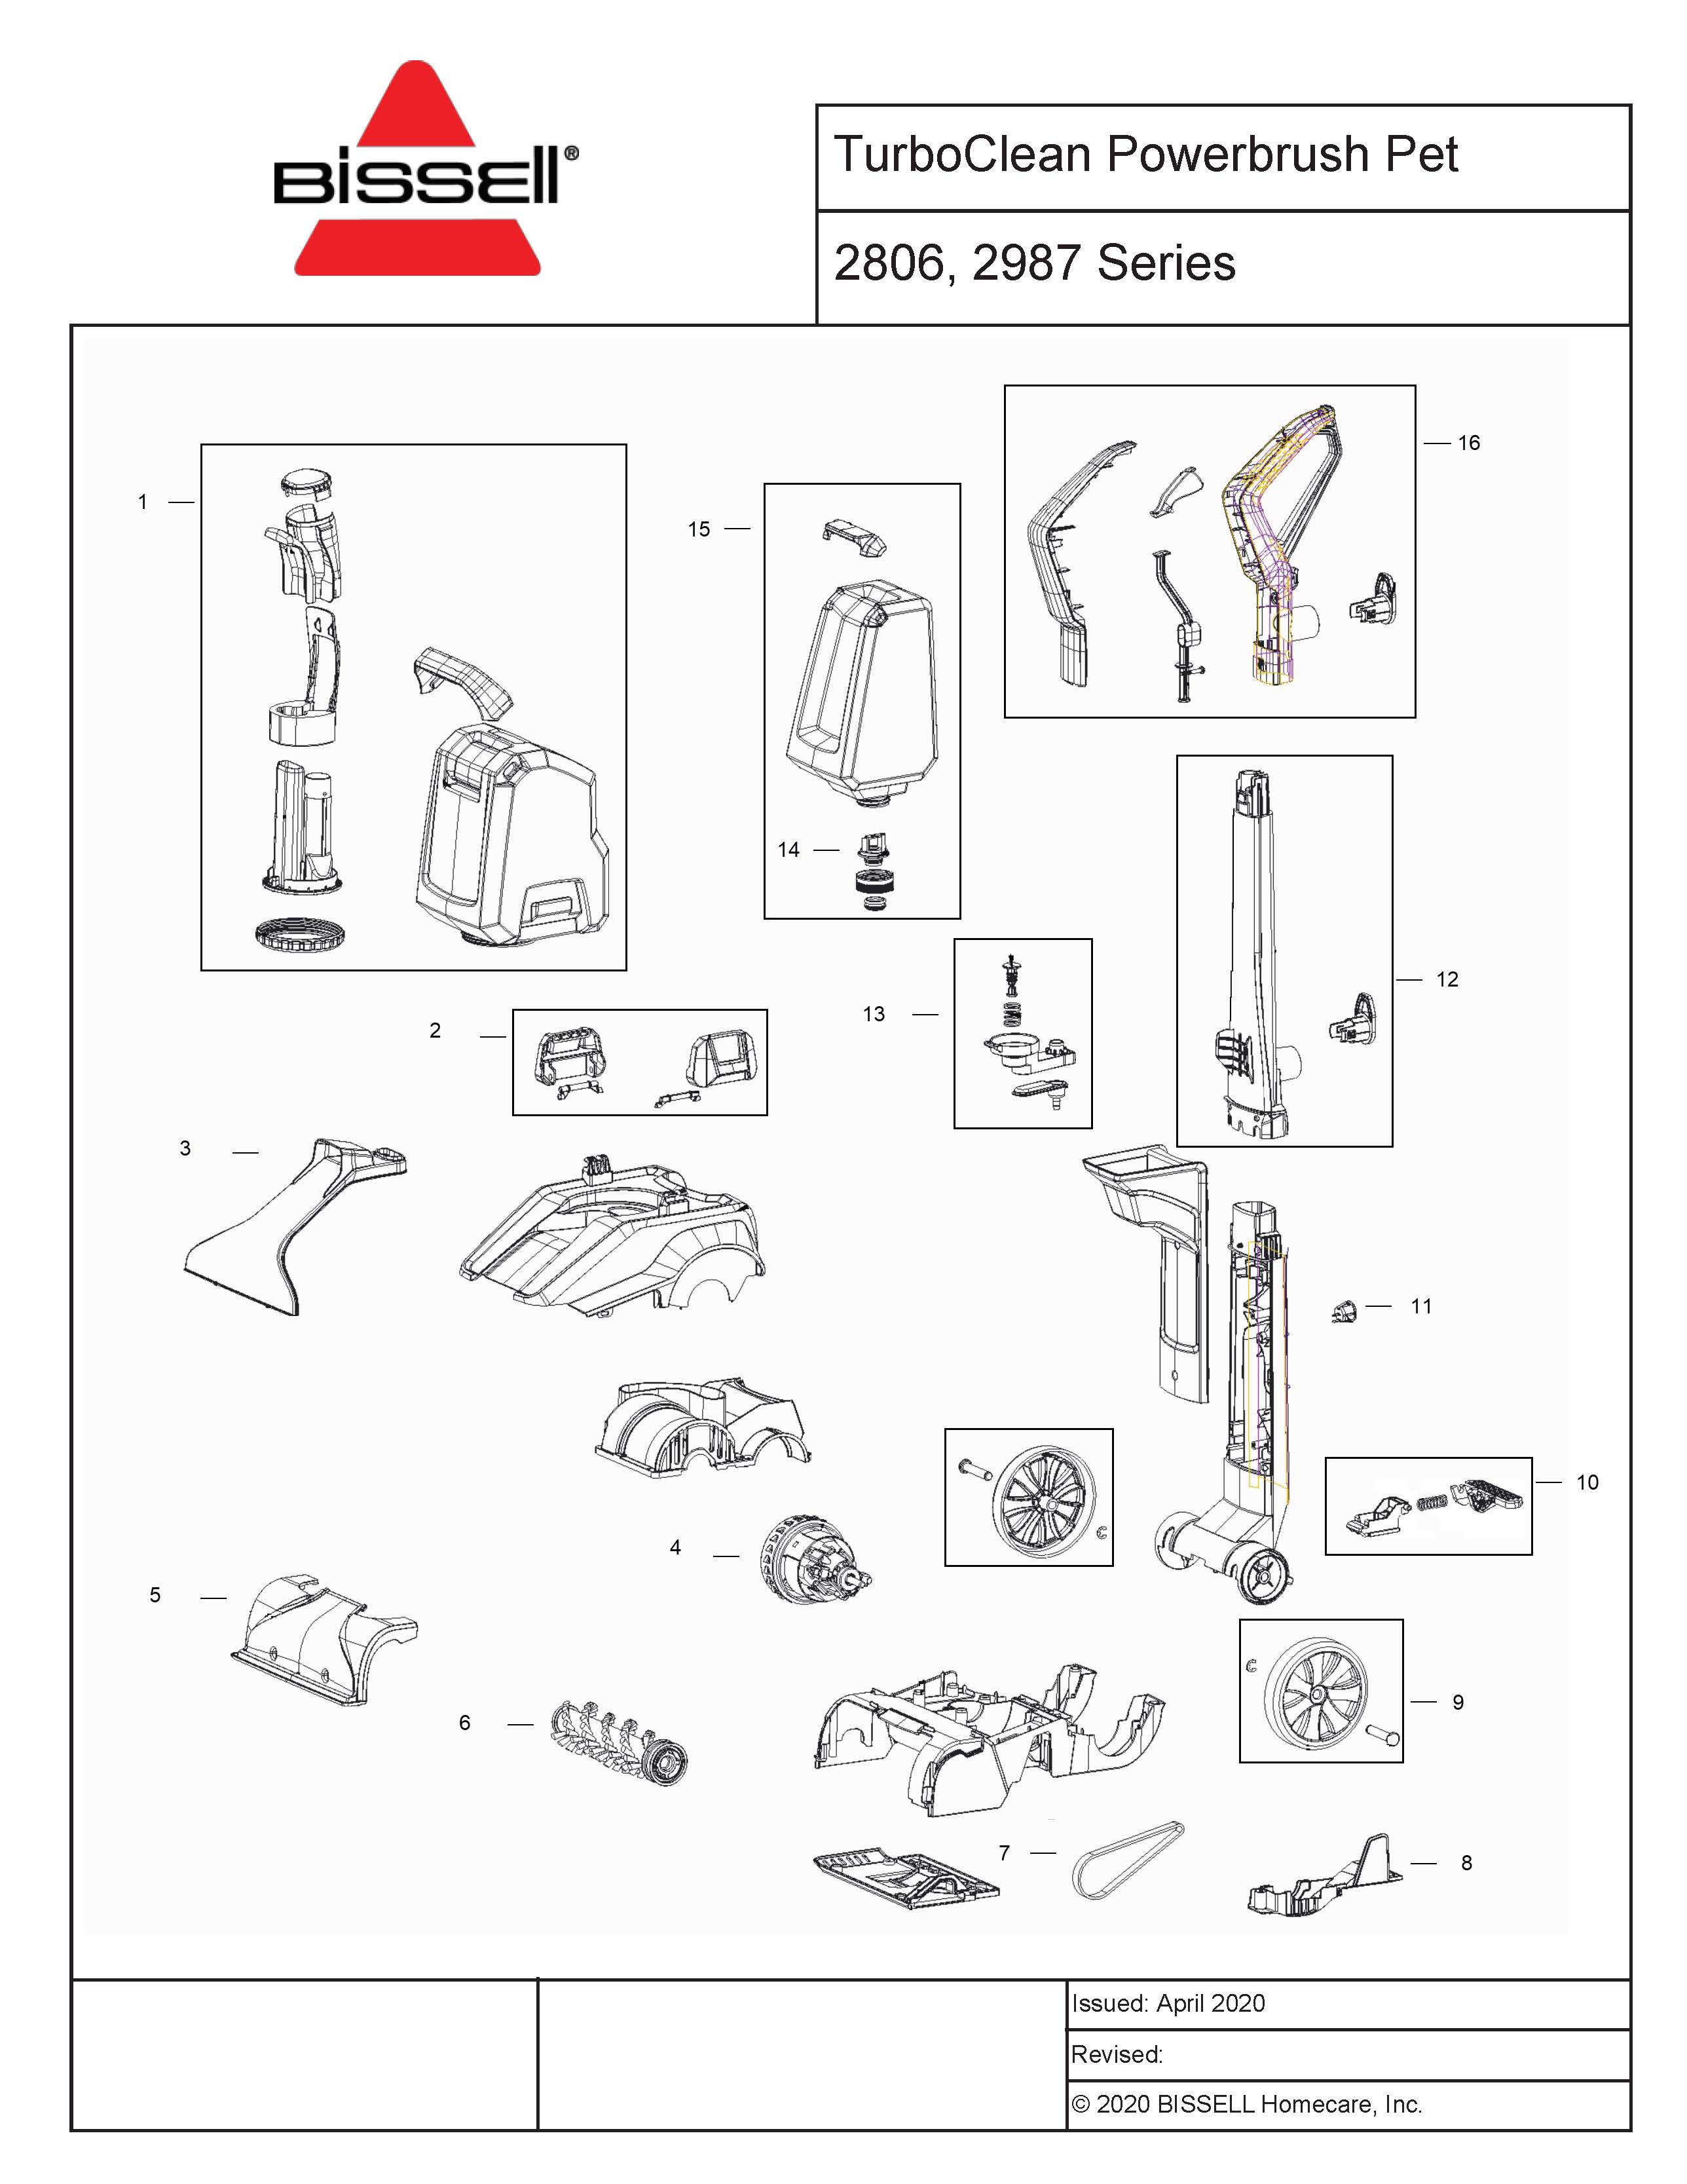 Schematic Parts Book for Bissell Model: 2987 TurboClean PowerBrush